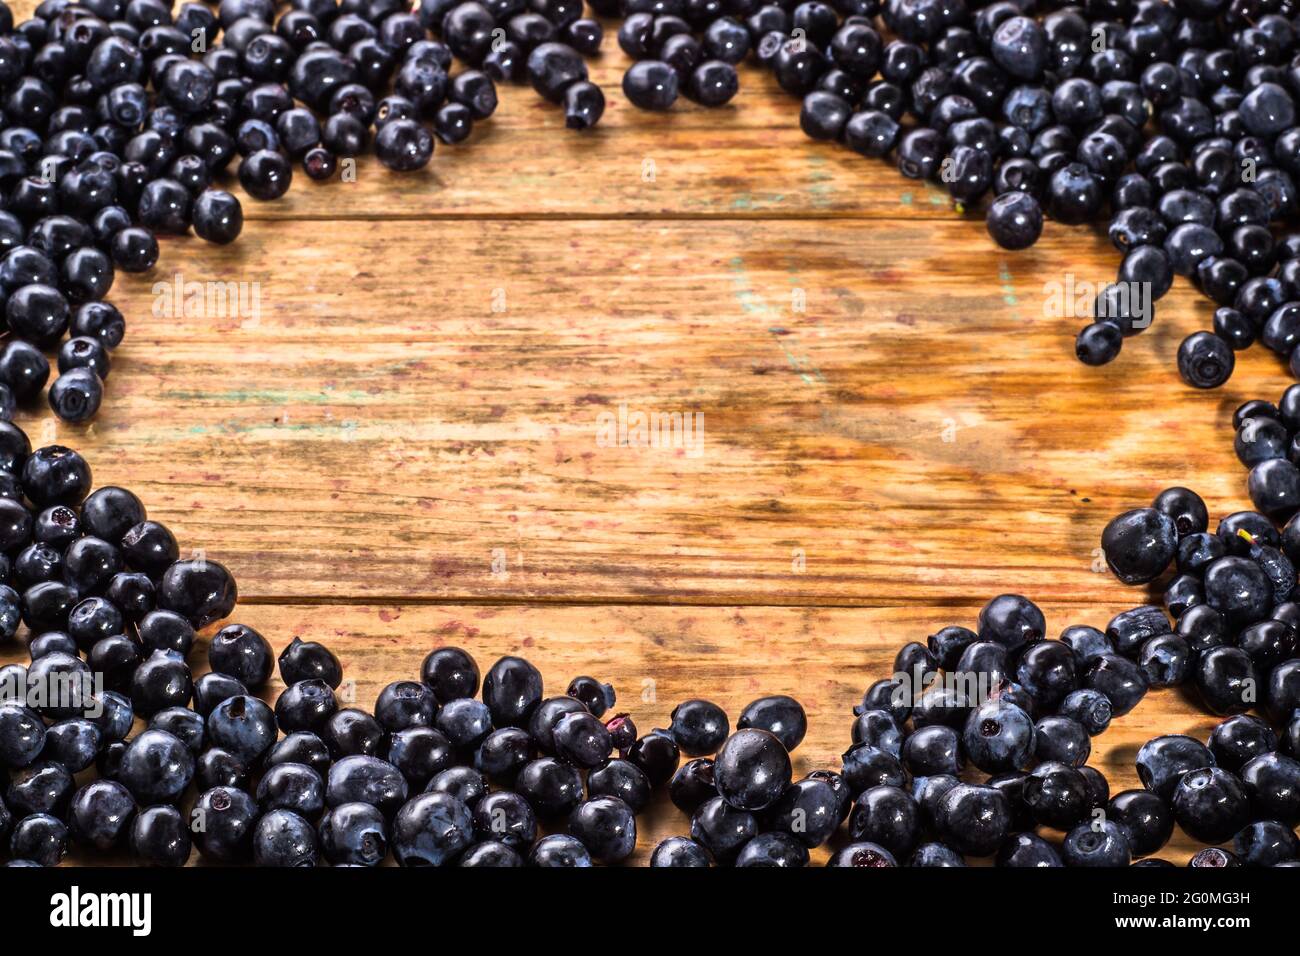 Close-up of blueberries picked in forest located on wooden planks background, background texture Stock Photo